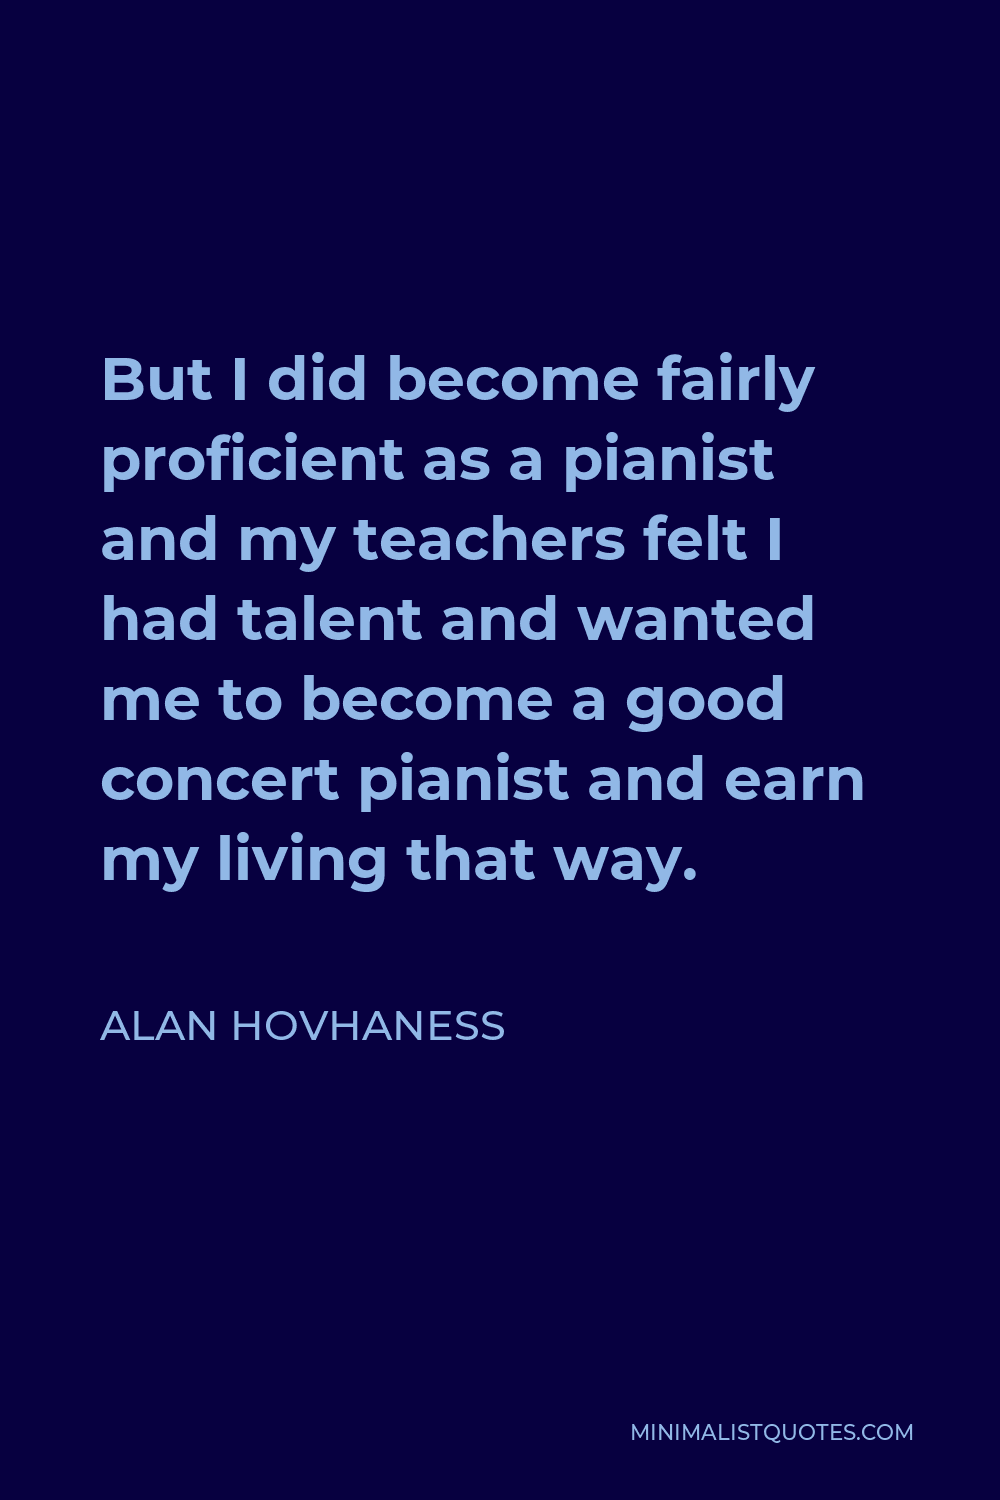 Alan Hovhaness Quote - But I did become fairly proficient as a pianist and my teachers felt I had talent and wanted me to become a good concert pianist and earn my living that way.